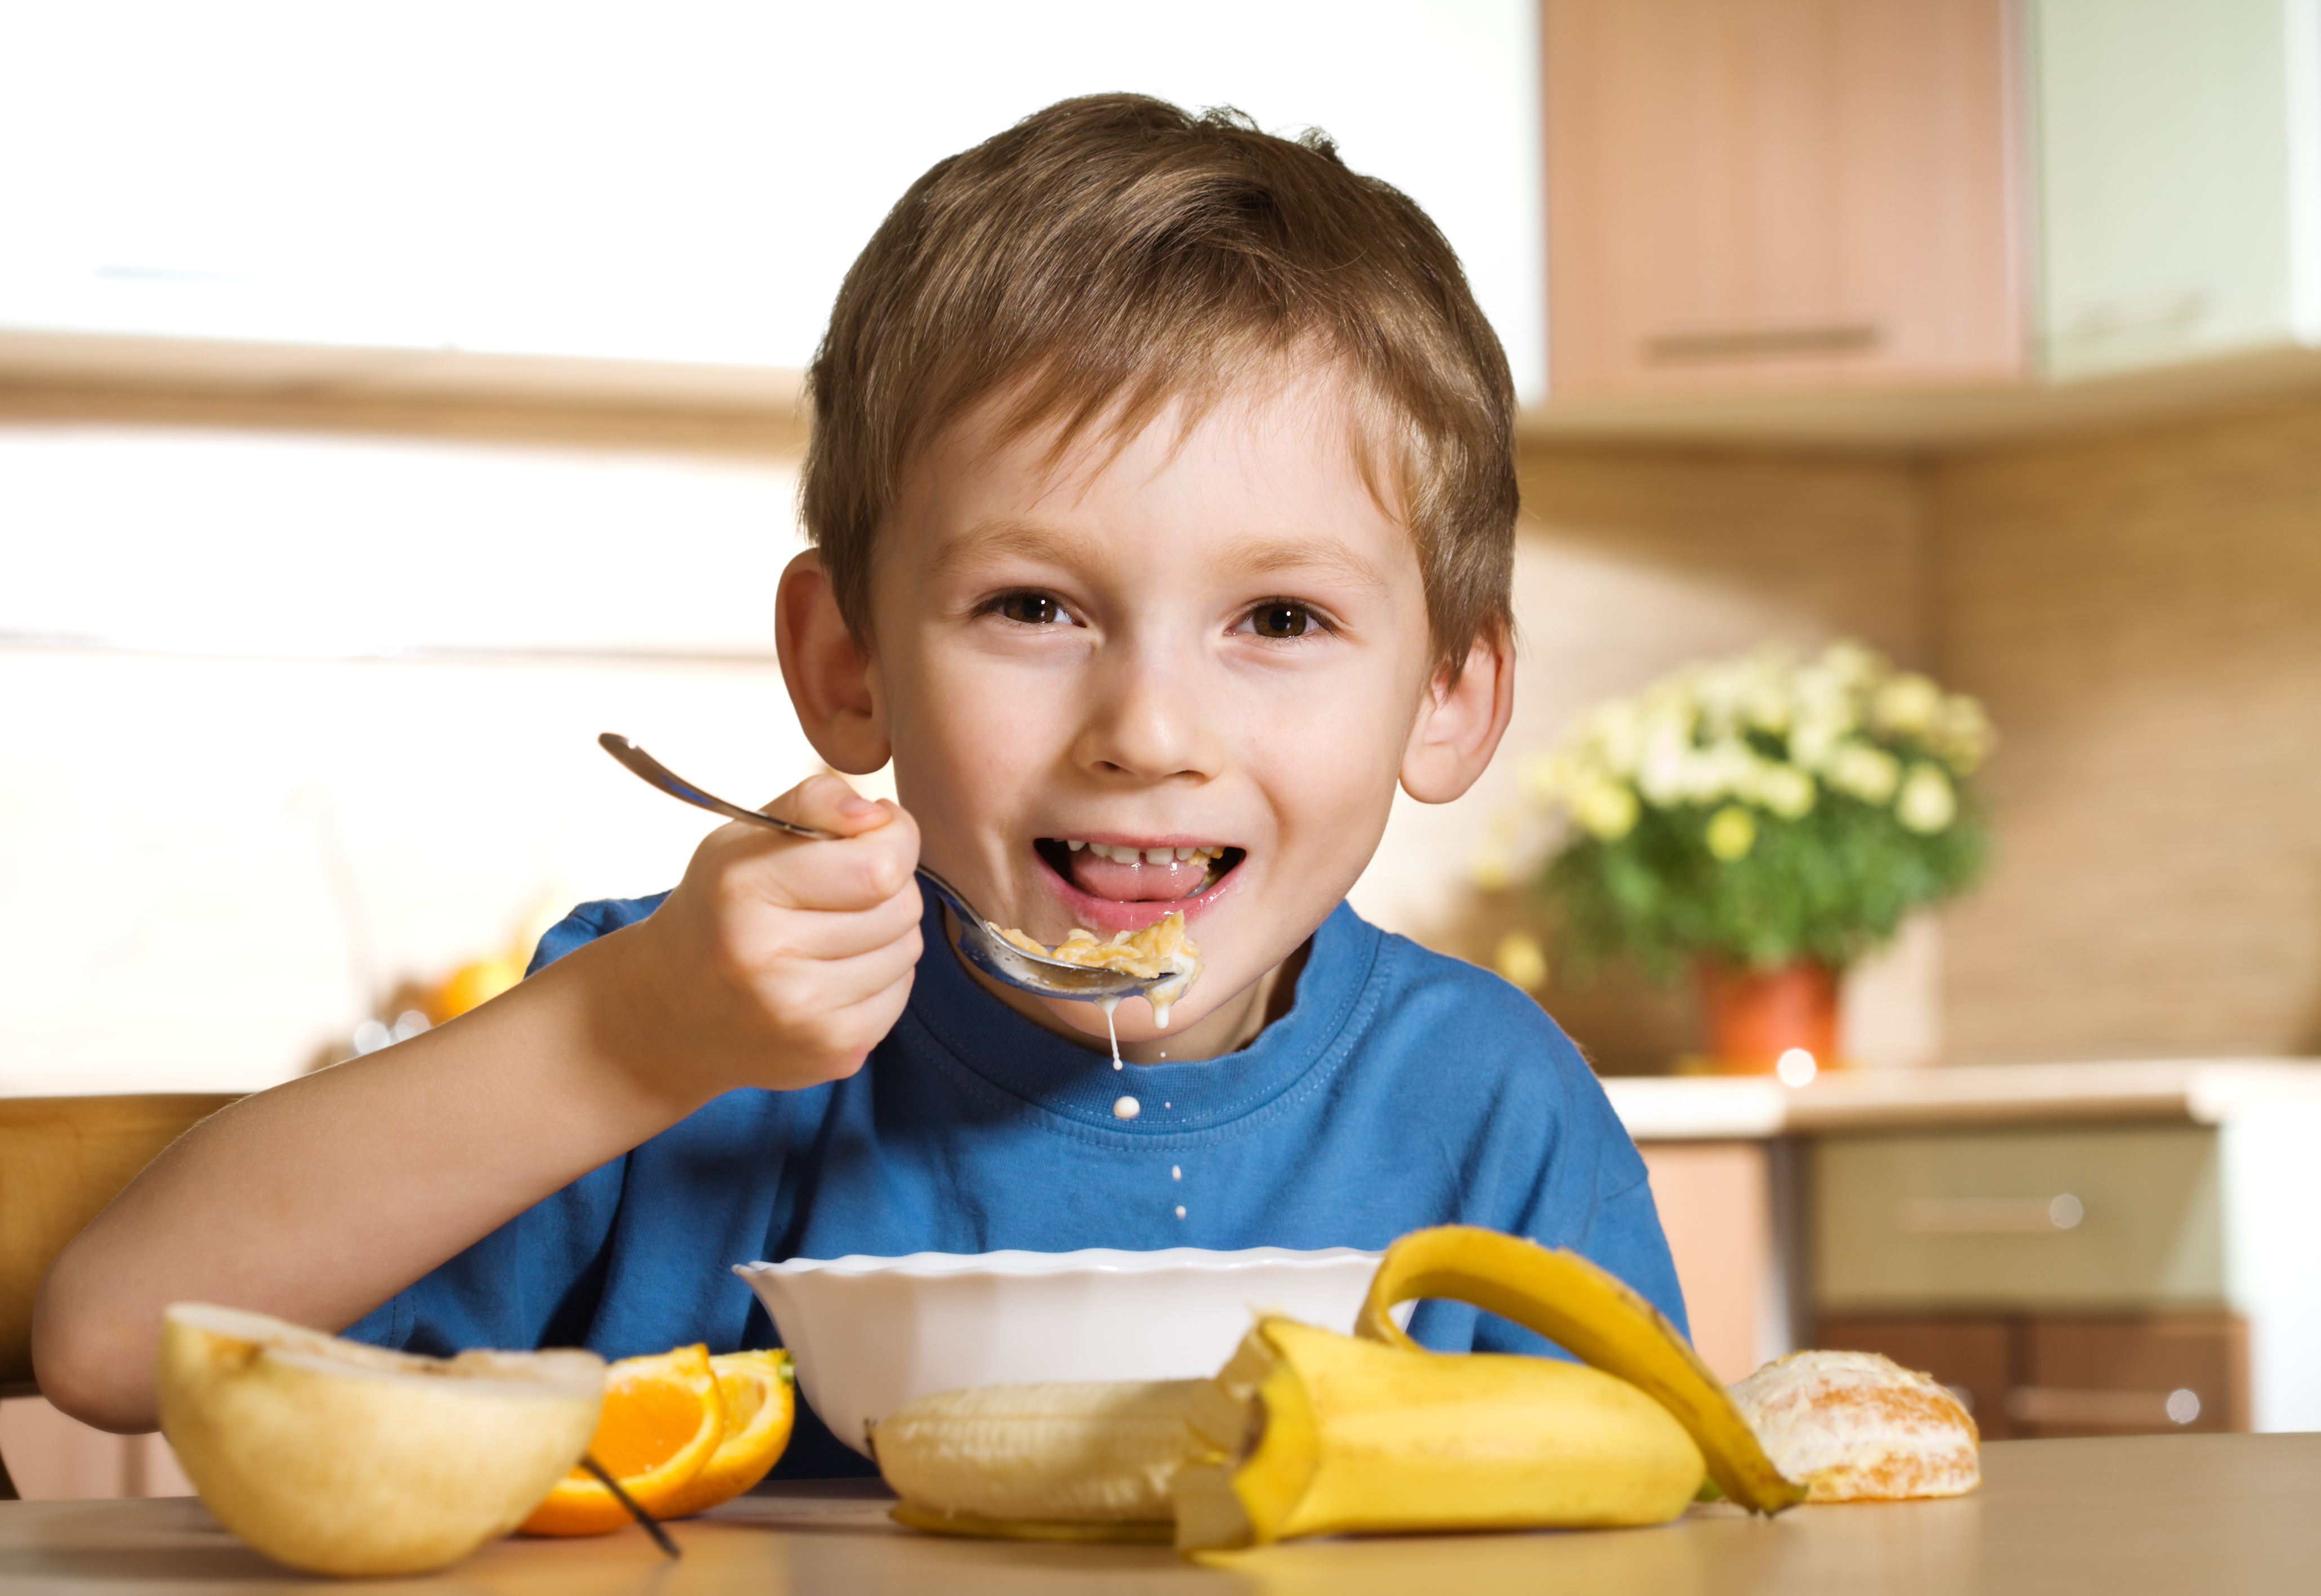 Deaconess - Quick & Healthy Breakfast Ideas for Your Family